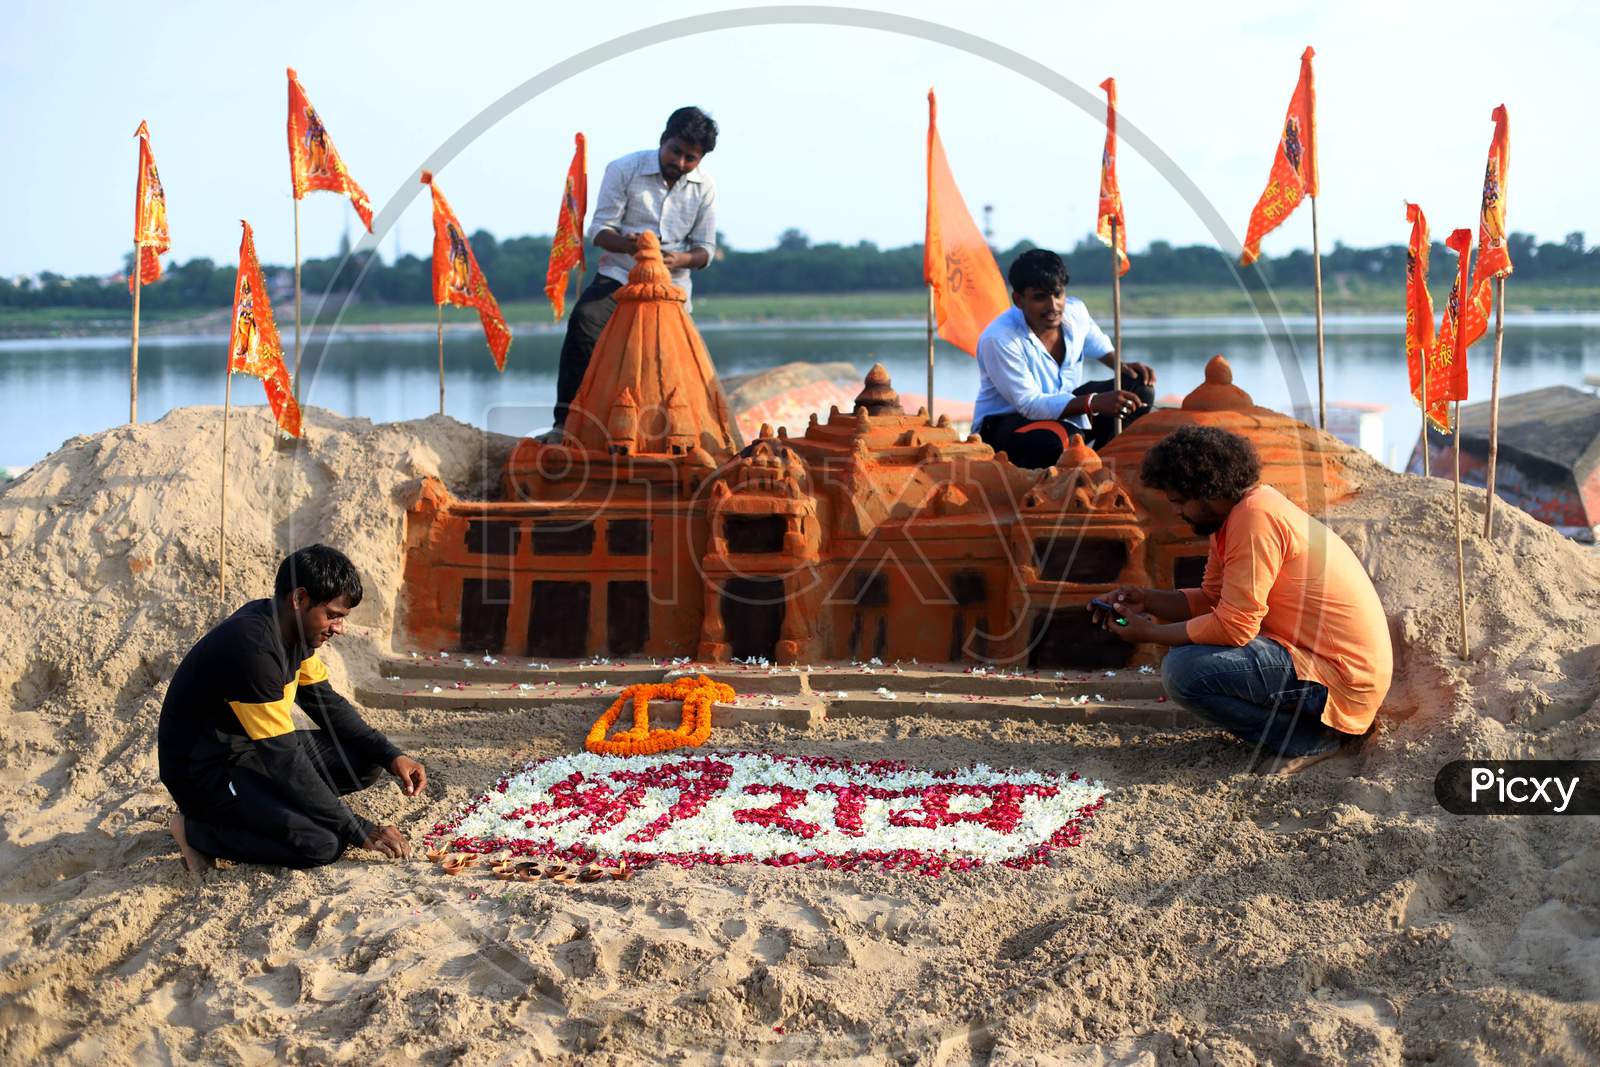 Allahabad Central University students built a sand sculpture of Ram Temple, ahead of the foundation ceremony of Ram temple in Ayodhya, on the banks of River Ganga at Sangam, in Prayagraj, August 4, 2020.